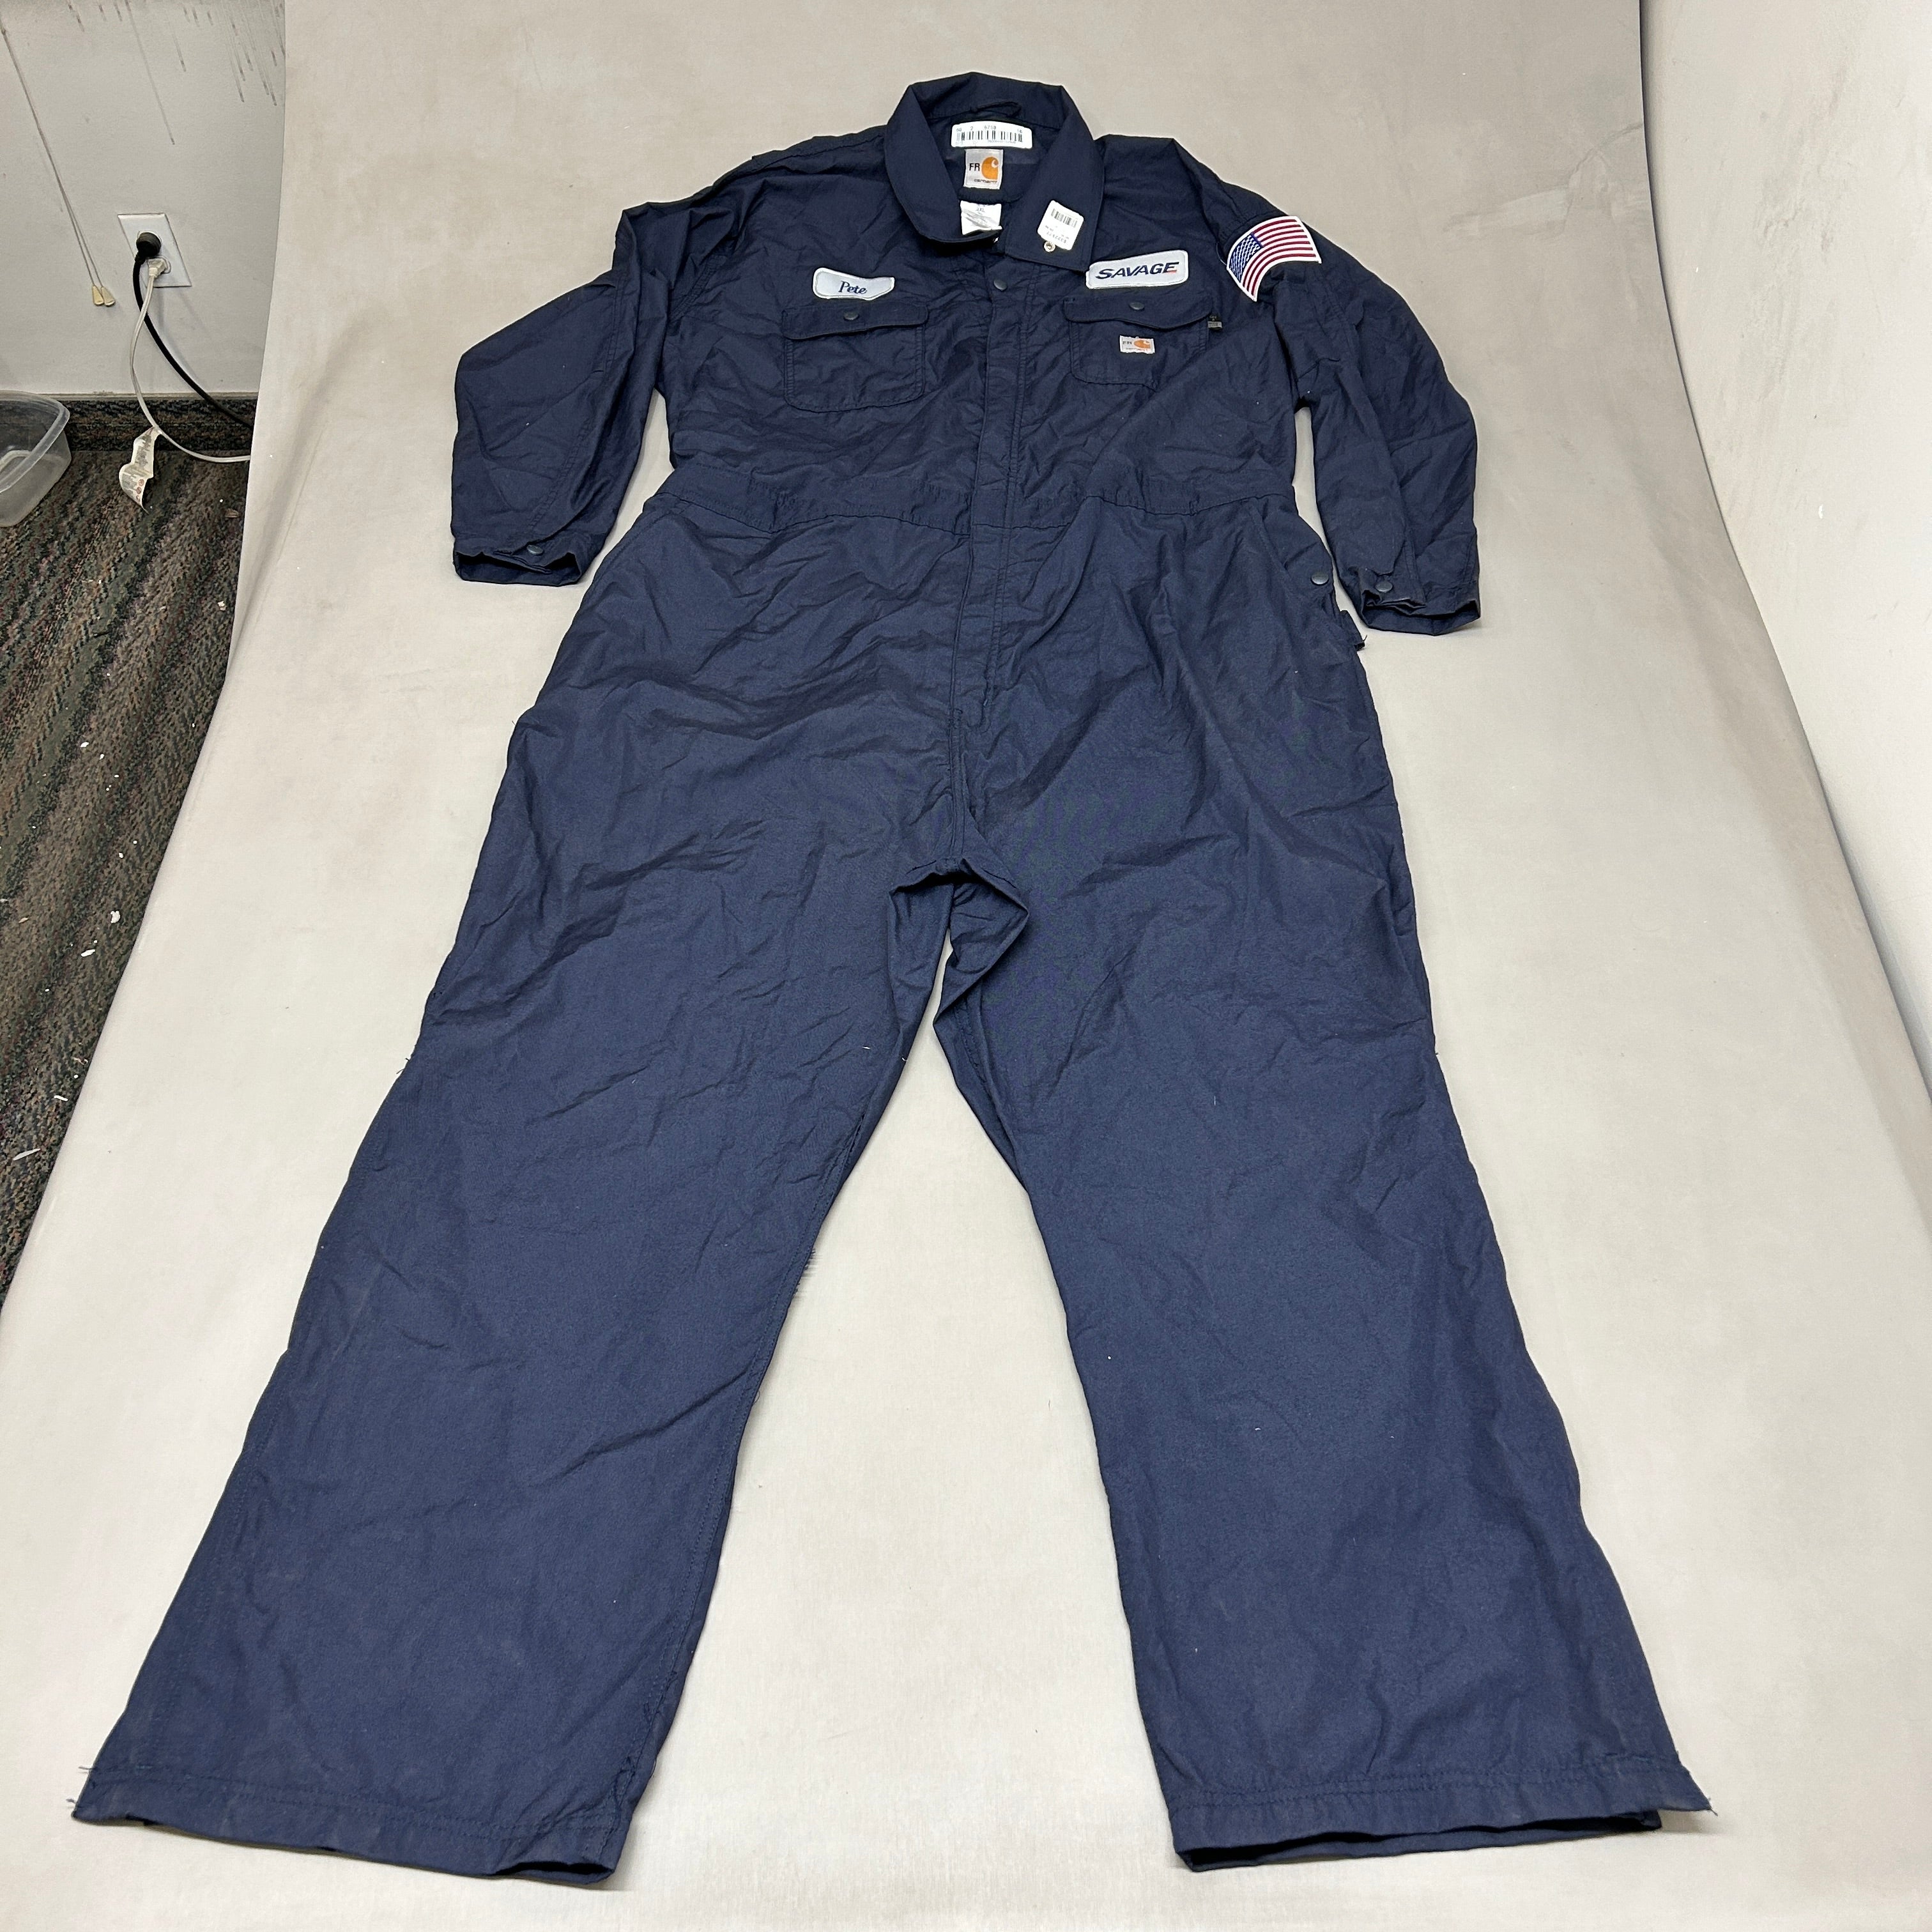 CARHARTT Fire-Resistant FR Coveralls w/ 